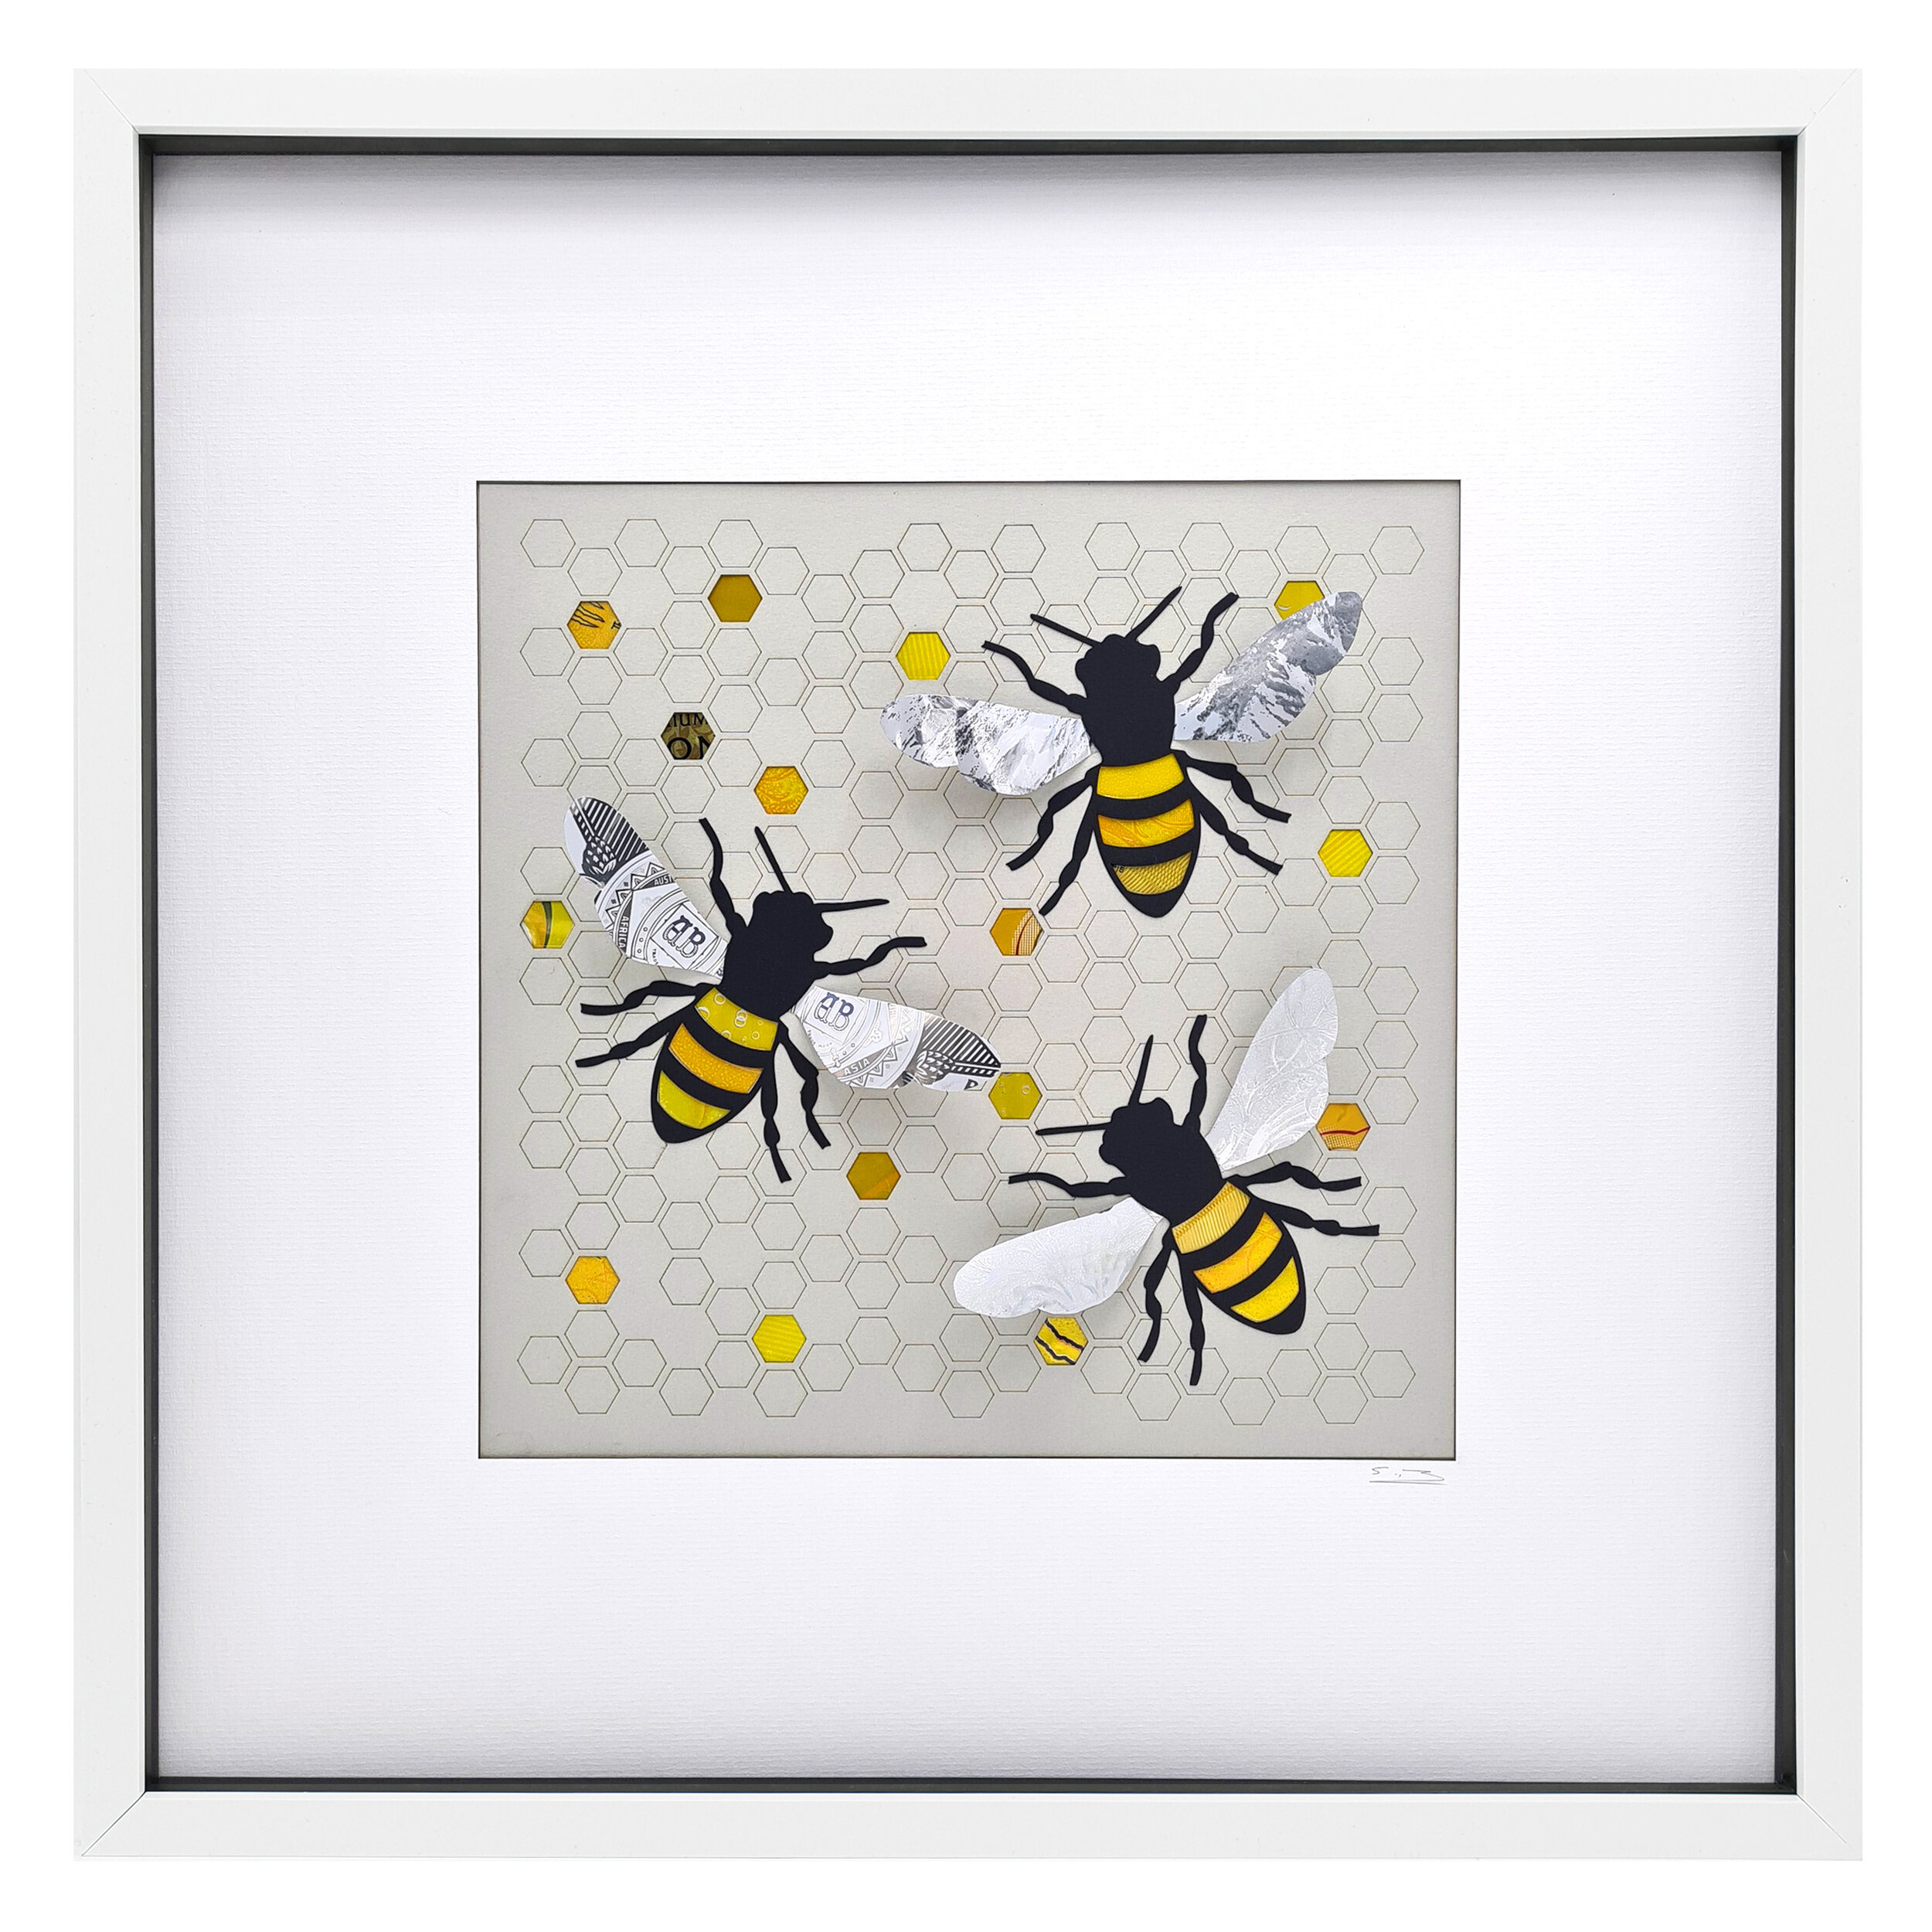 Large framed artwork of bumble bees made from waste drinks cans